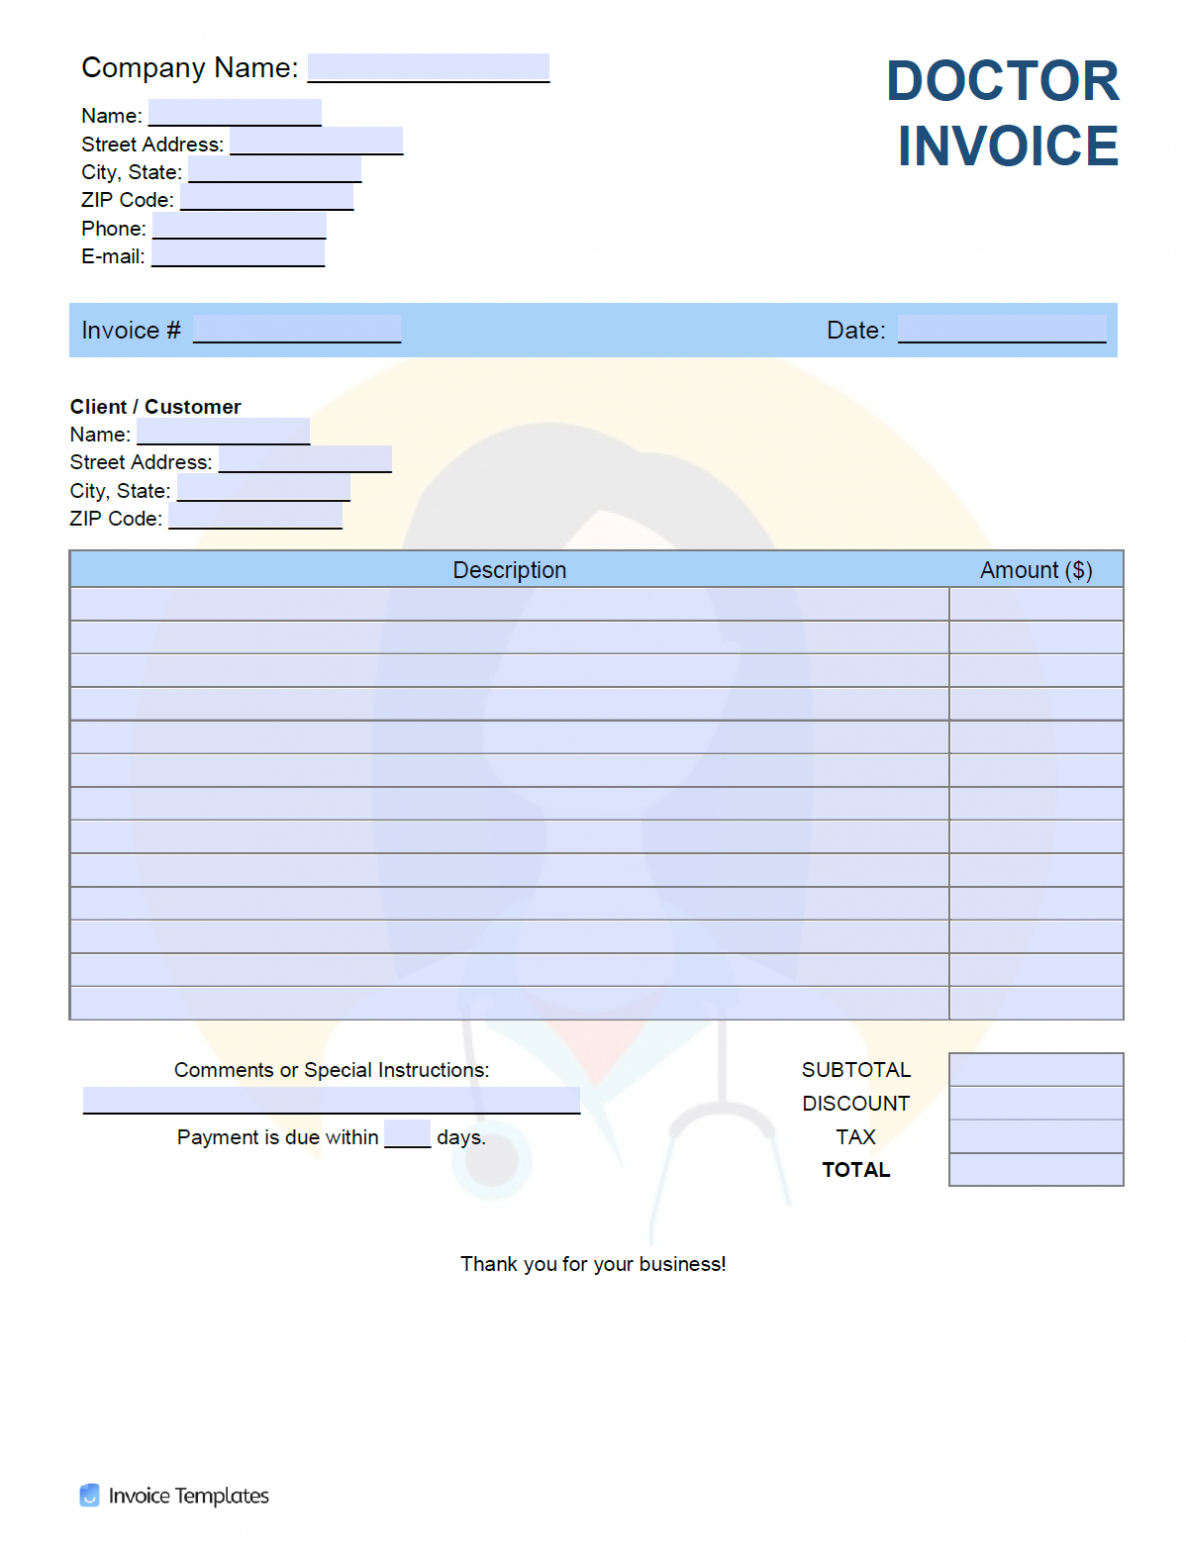 Free Doctor (Physician) Invoice Template | Pdf | Word | Excel regarding Doctors Invoice Template